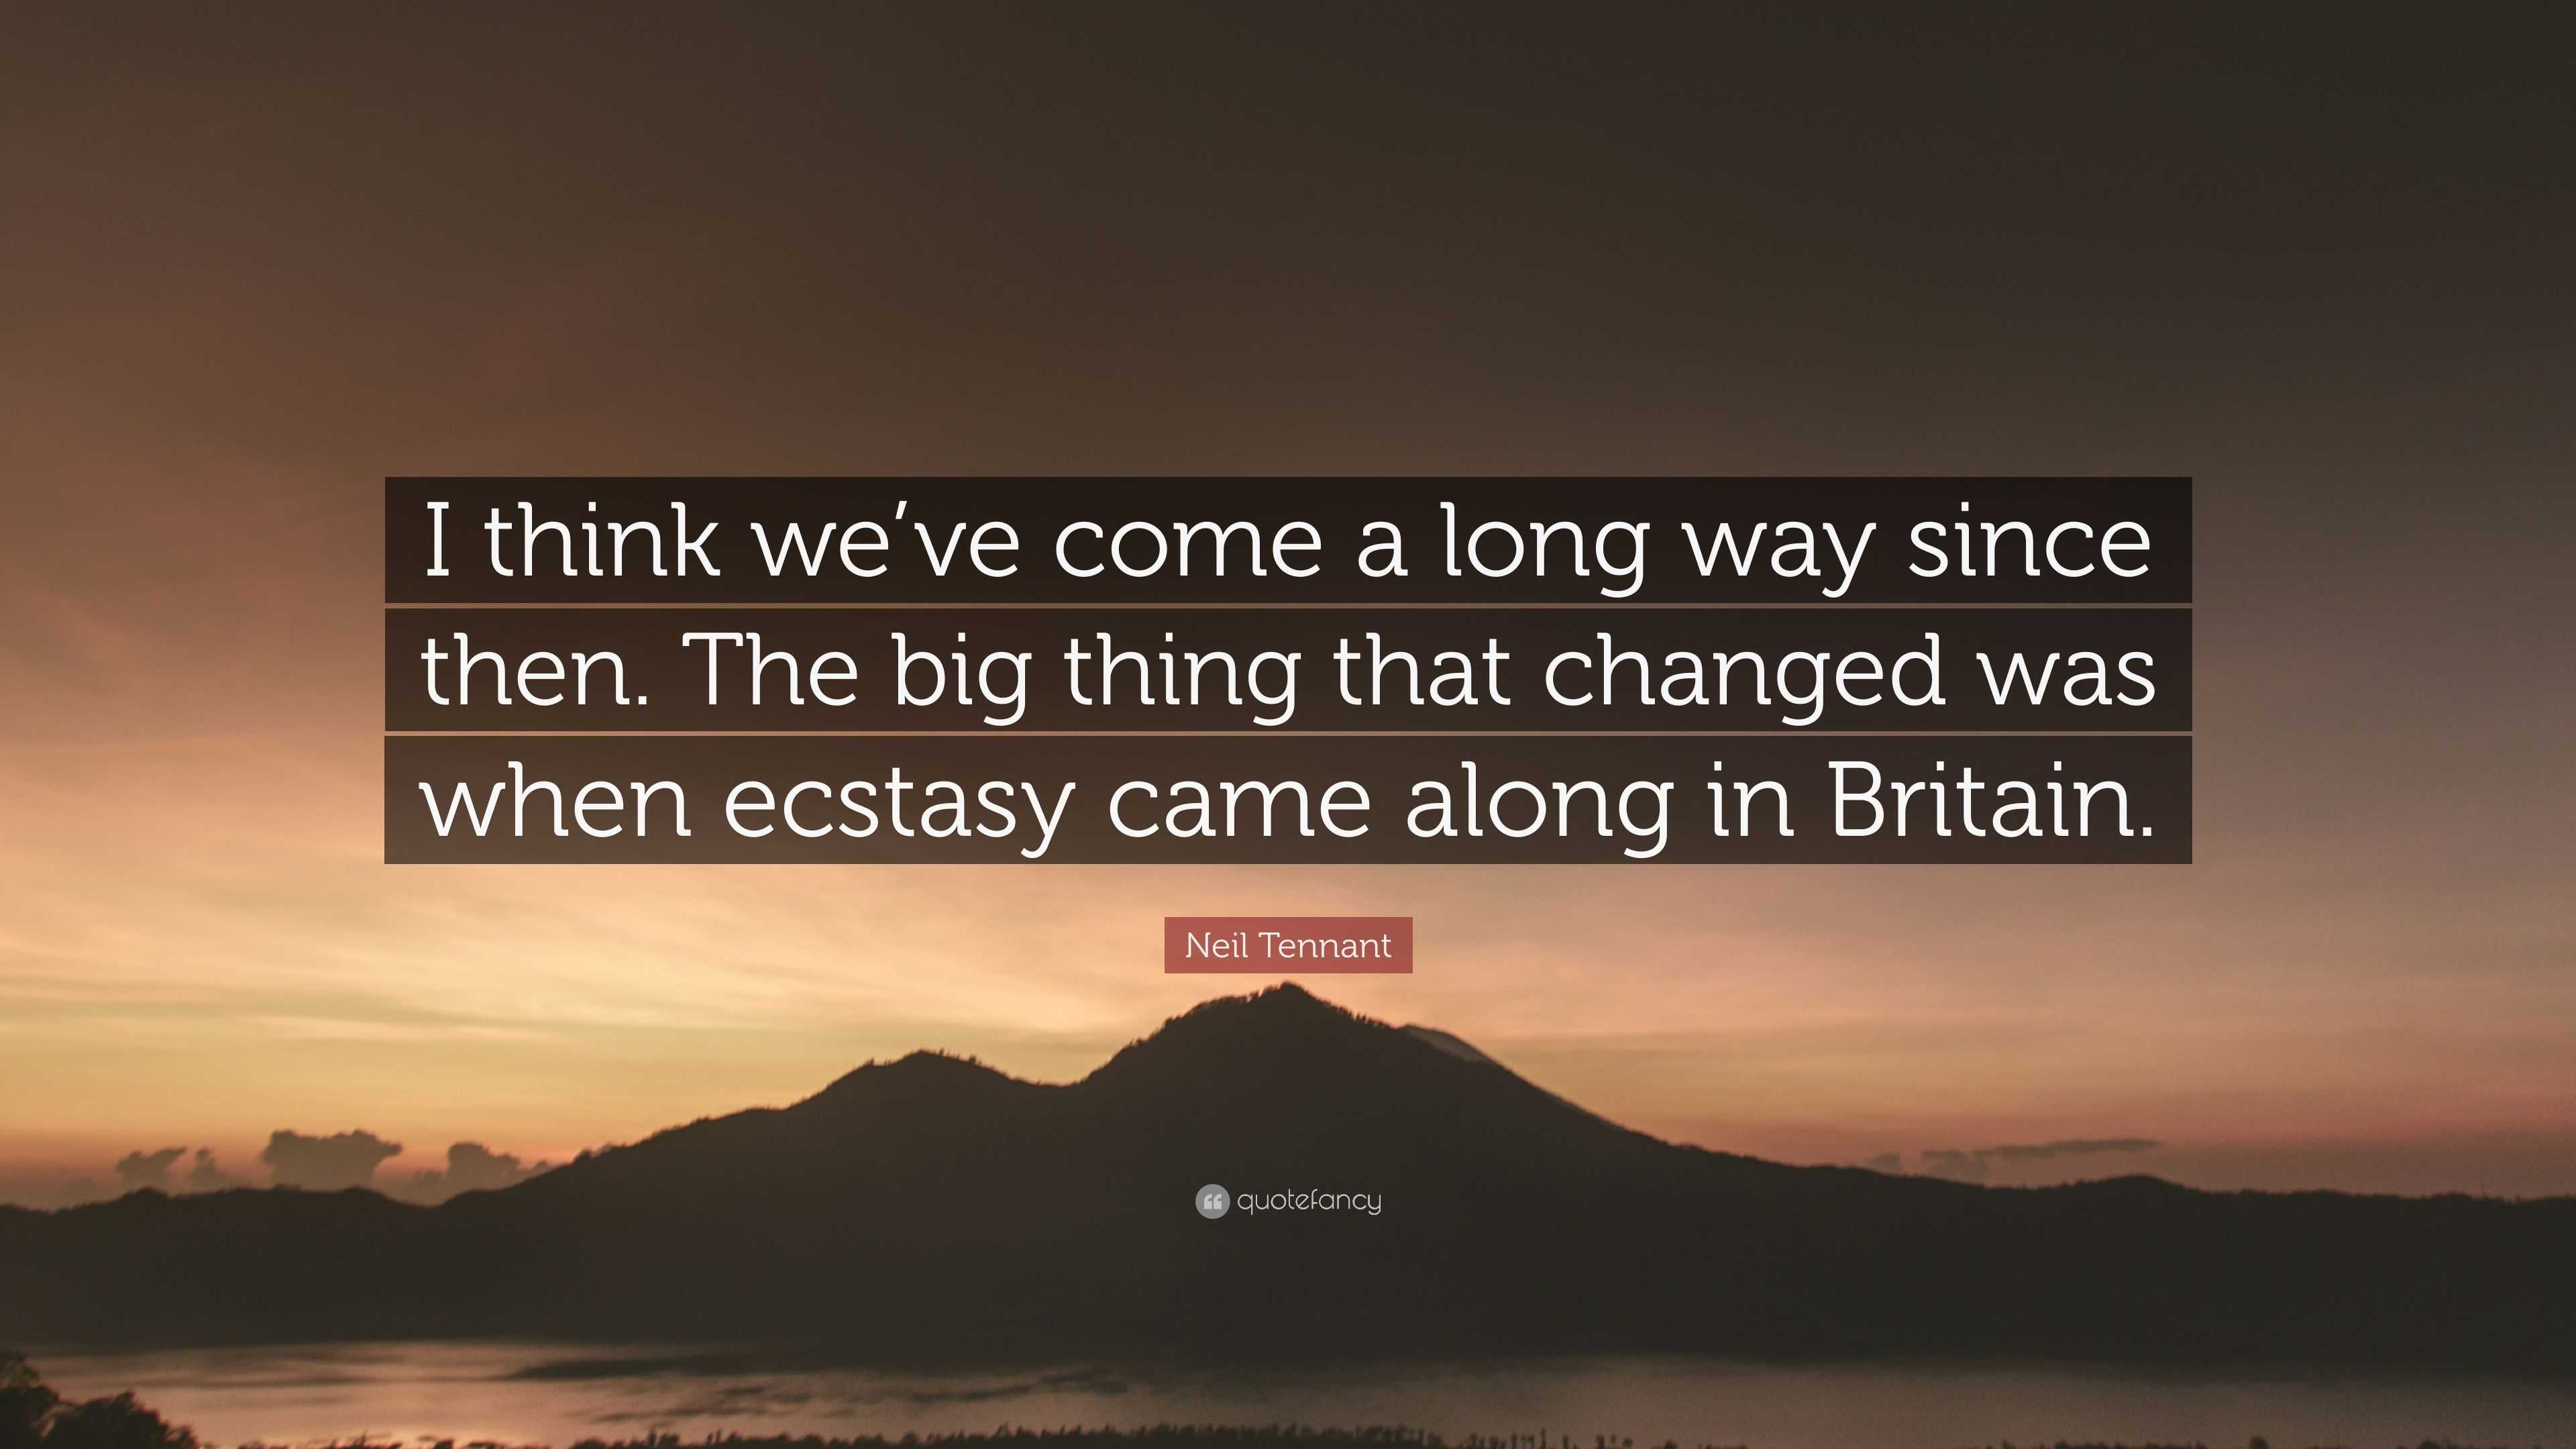 https://quotefancy.com/media/wallpaper/3840x2160/4000485-Neil-Tennant-Quote-I-think-we-ve-come-a-long-way-since-then-The.jpg